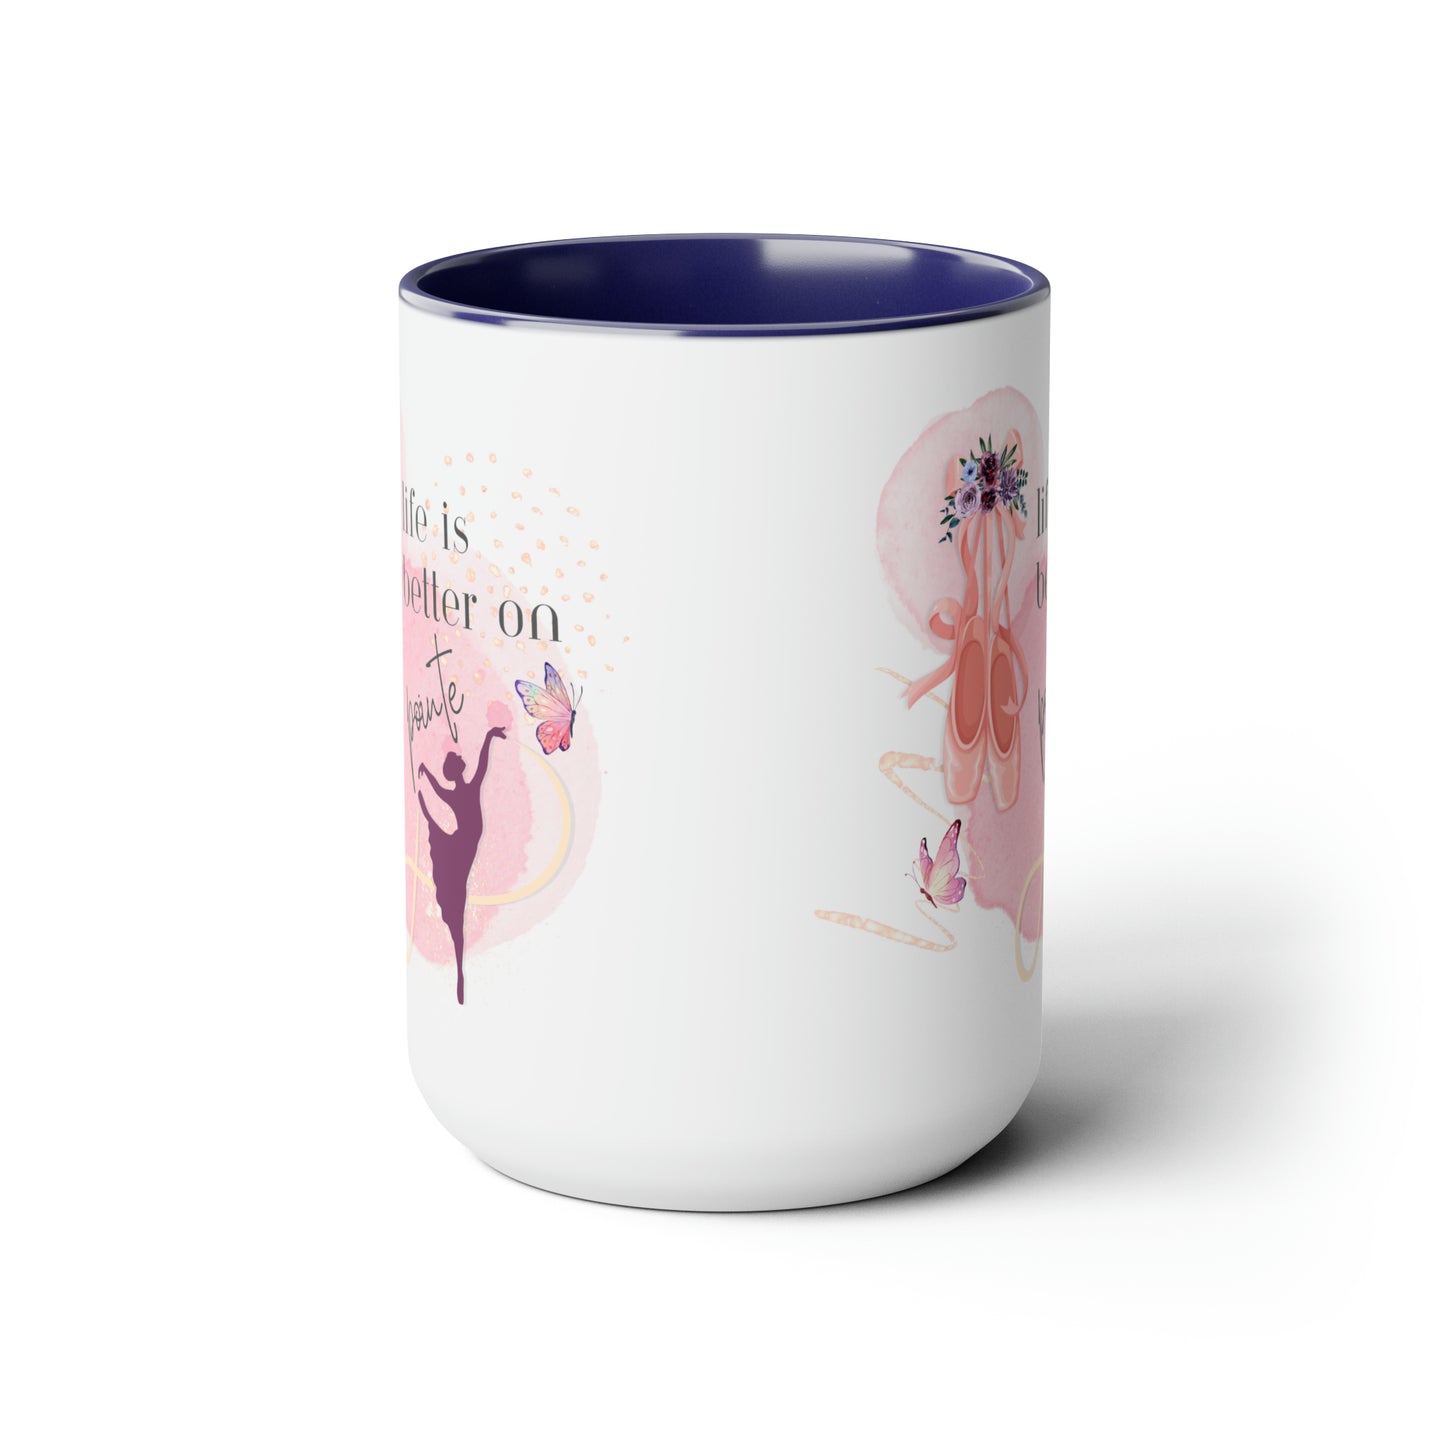 Two-Tone Coffee Mugs, 15oz - Ballerinas - Life is better on pointe